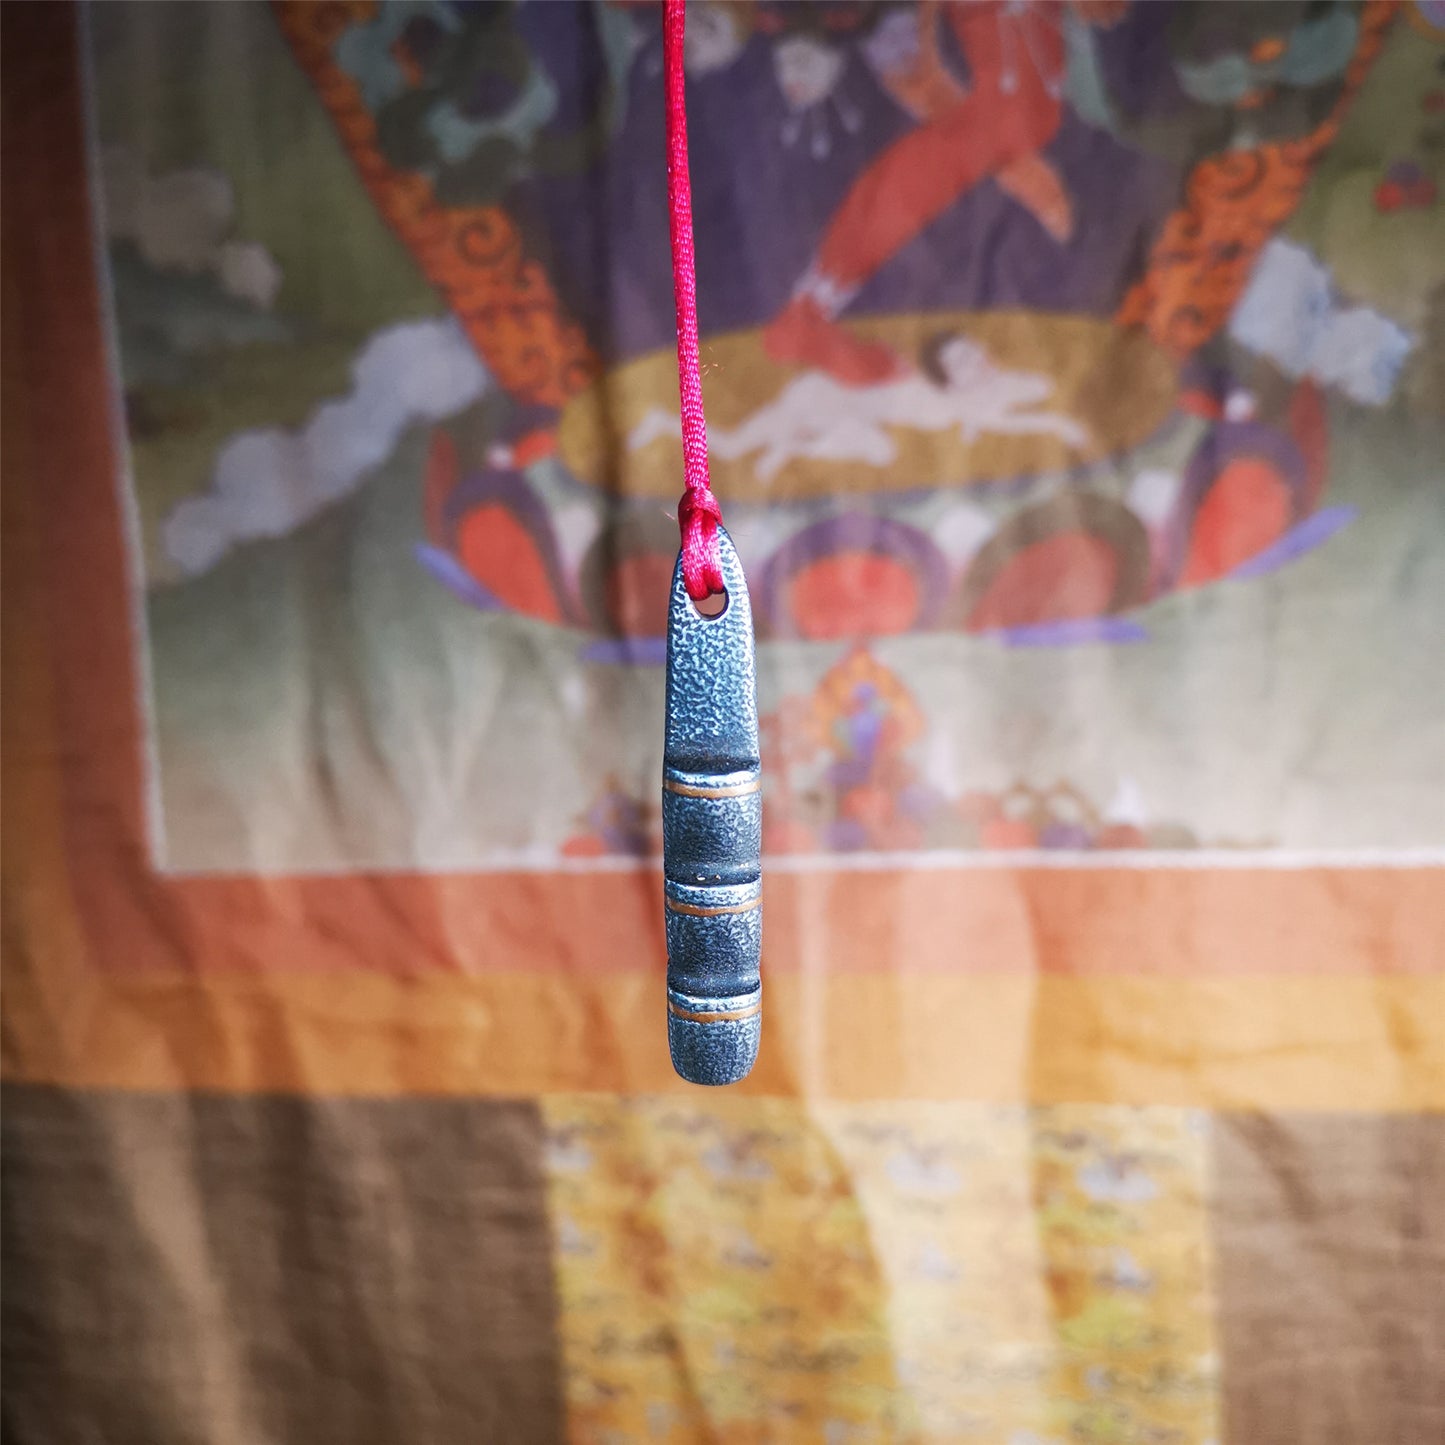 This unique Ladder pendant is made by Tibetan craftsmen. It is made of cold iron and copper, black color,the shape is Tibetan Ladder of Heaven,length is 53mm. You can make it into a pendant,keychain, or just put it on your desk,as an ornament.